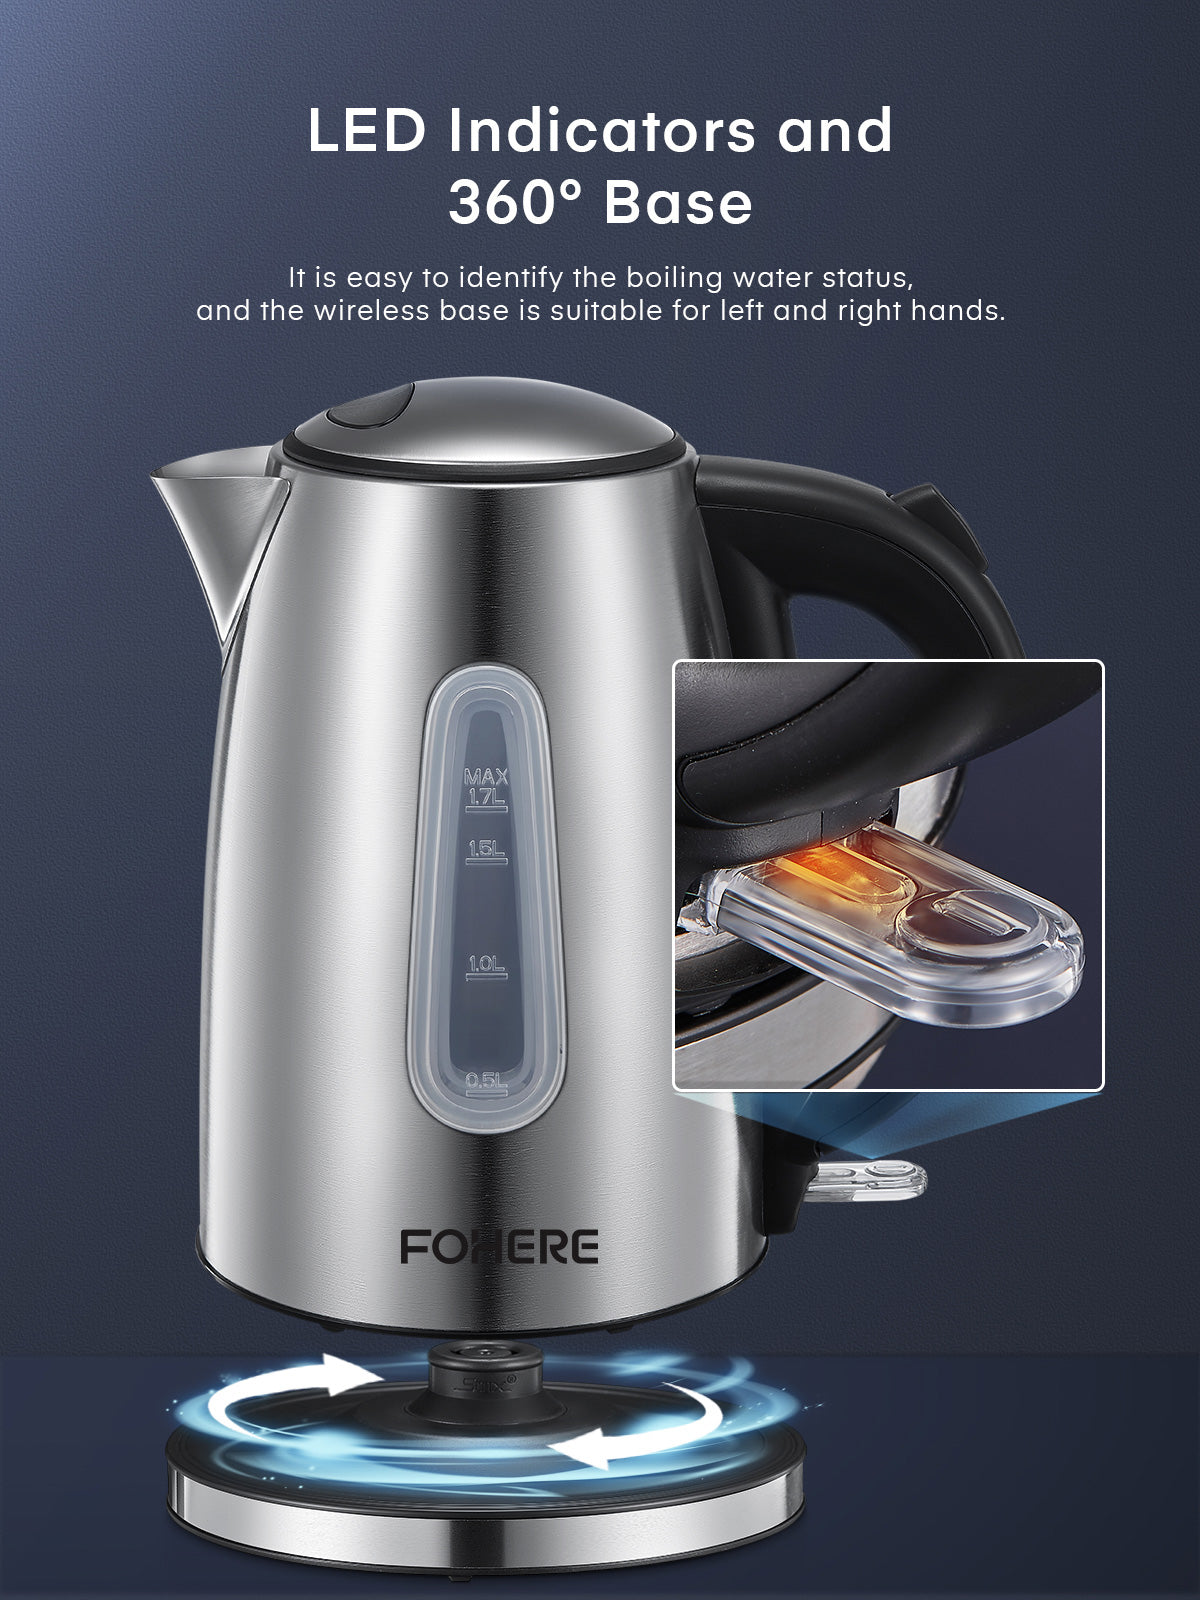 3000W Fast Boil Kettle, FOHERE Stainless Steel Cordless Electric Kettle, BPA-Free Hot Water Boiler, 1.7 Liter, Removable Washable Filter, Boil Dry Protection & Auto Shut Off, Silver